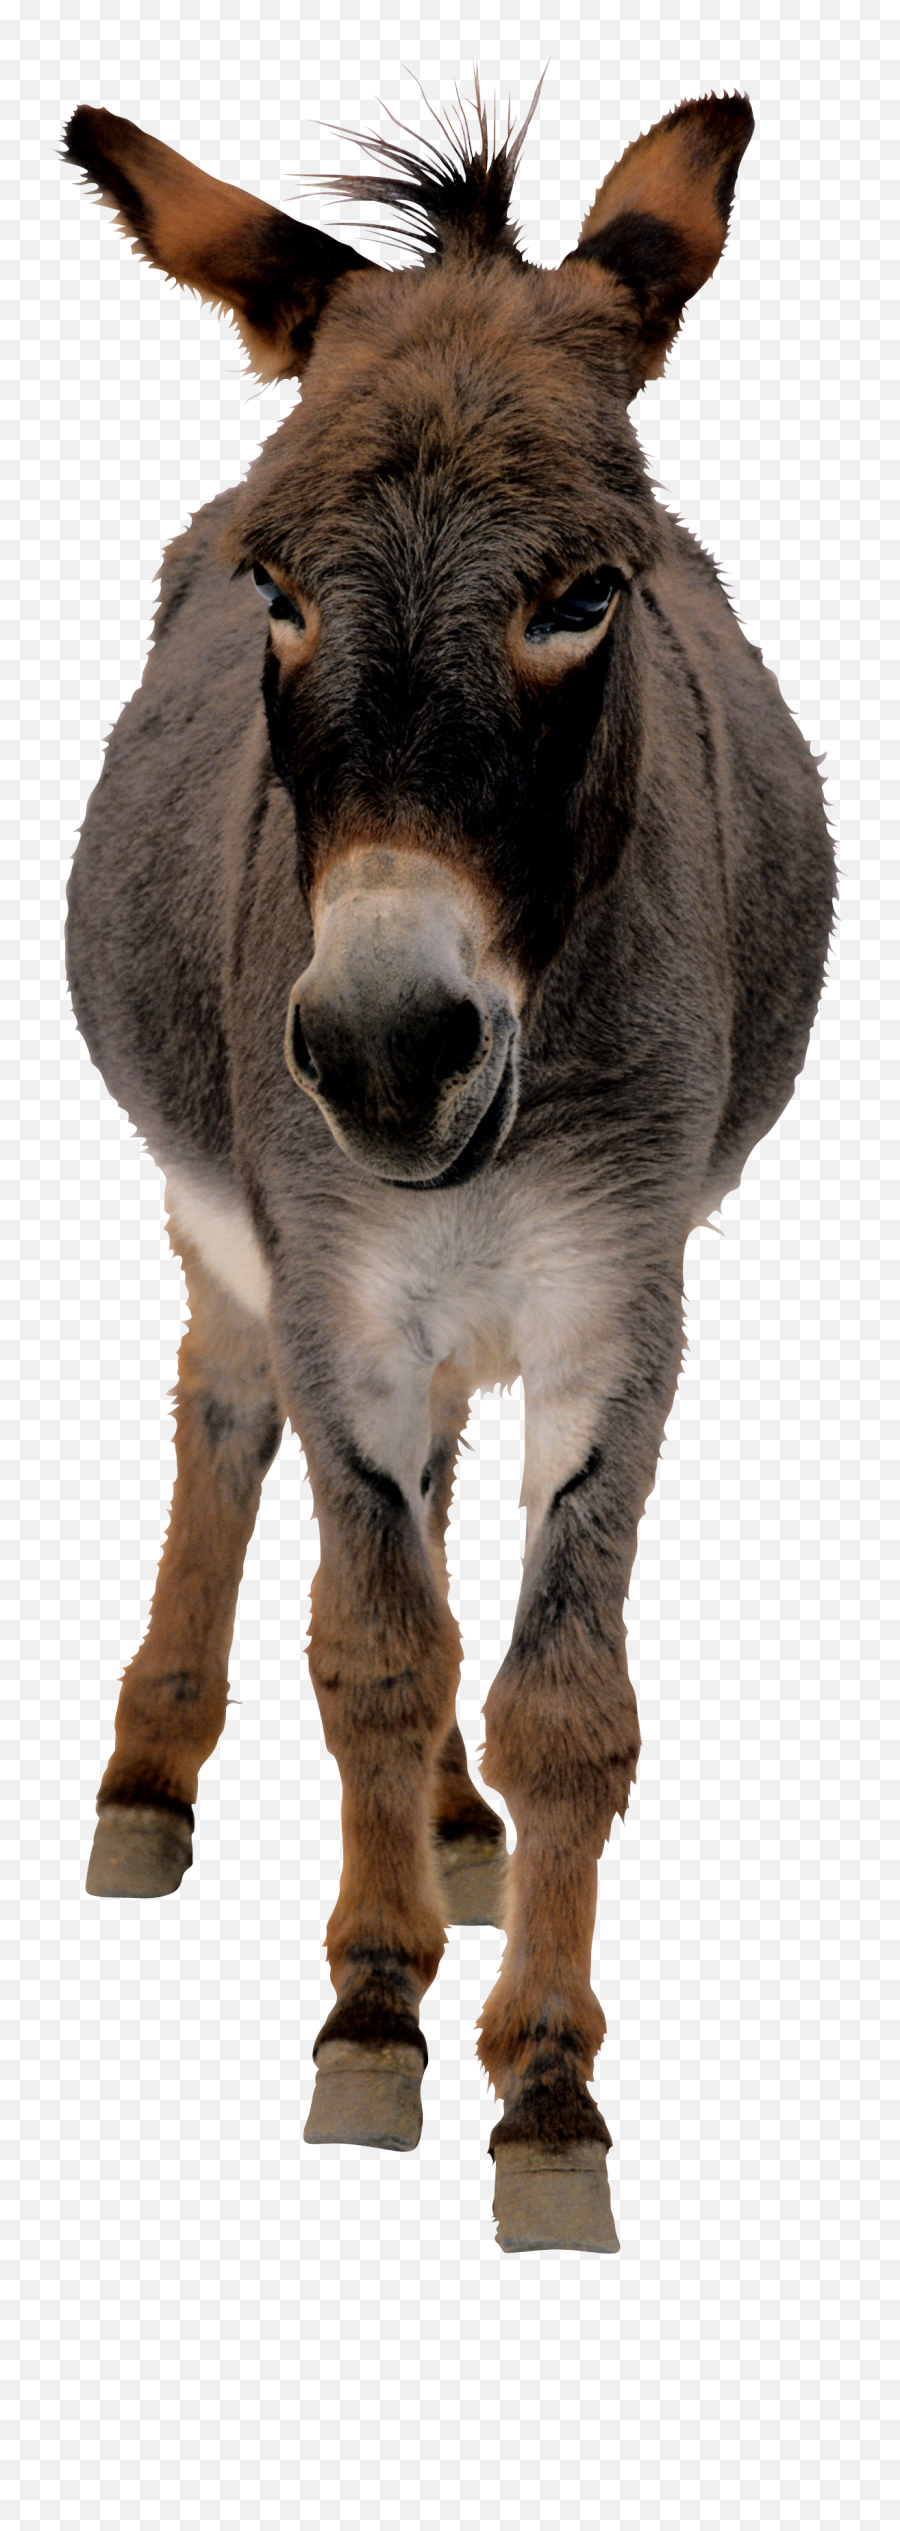 Donkey Png Images Free Download - Donkey Png,Donkey Png